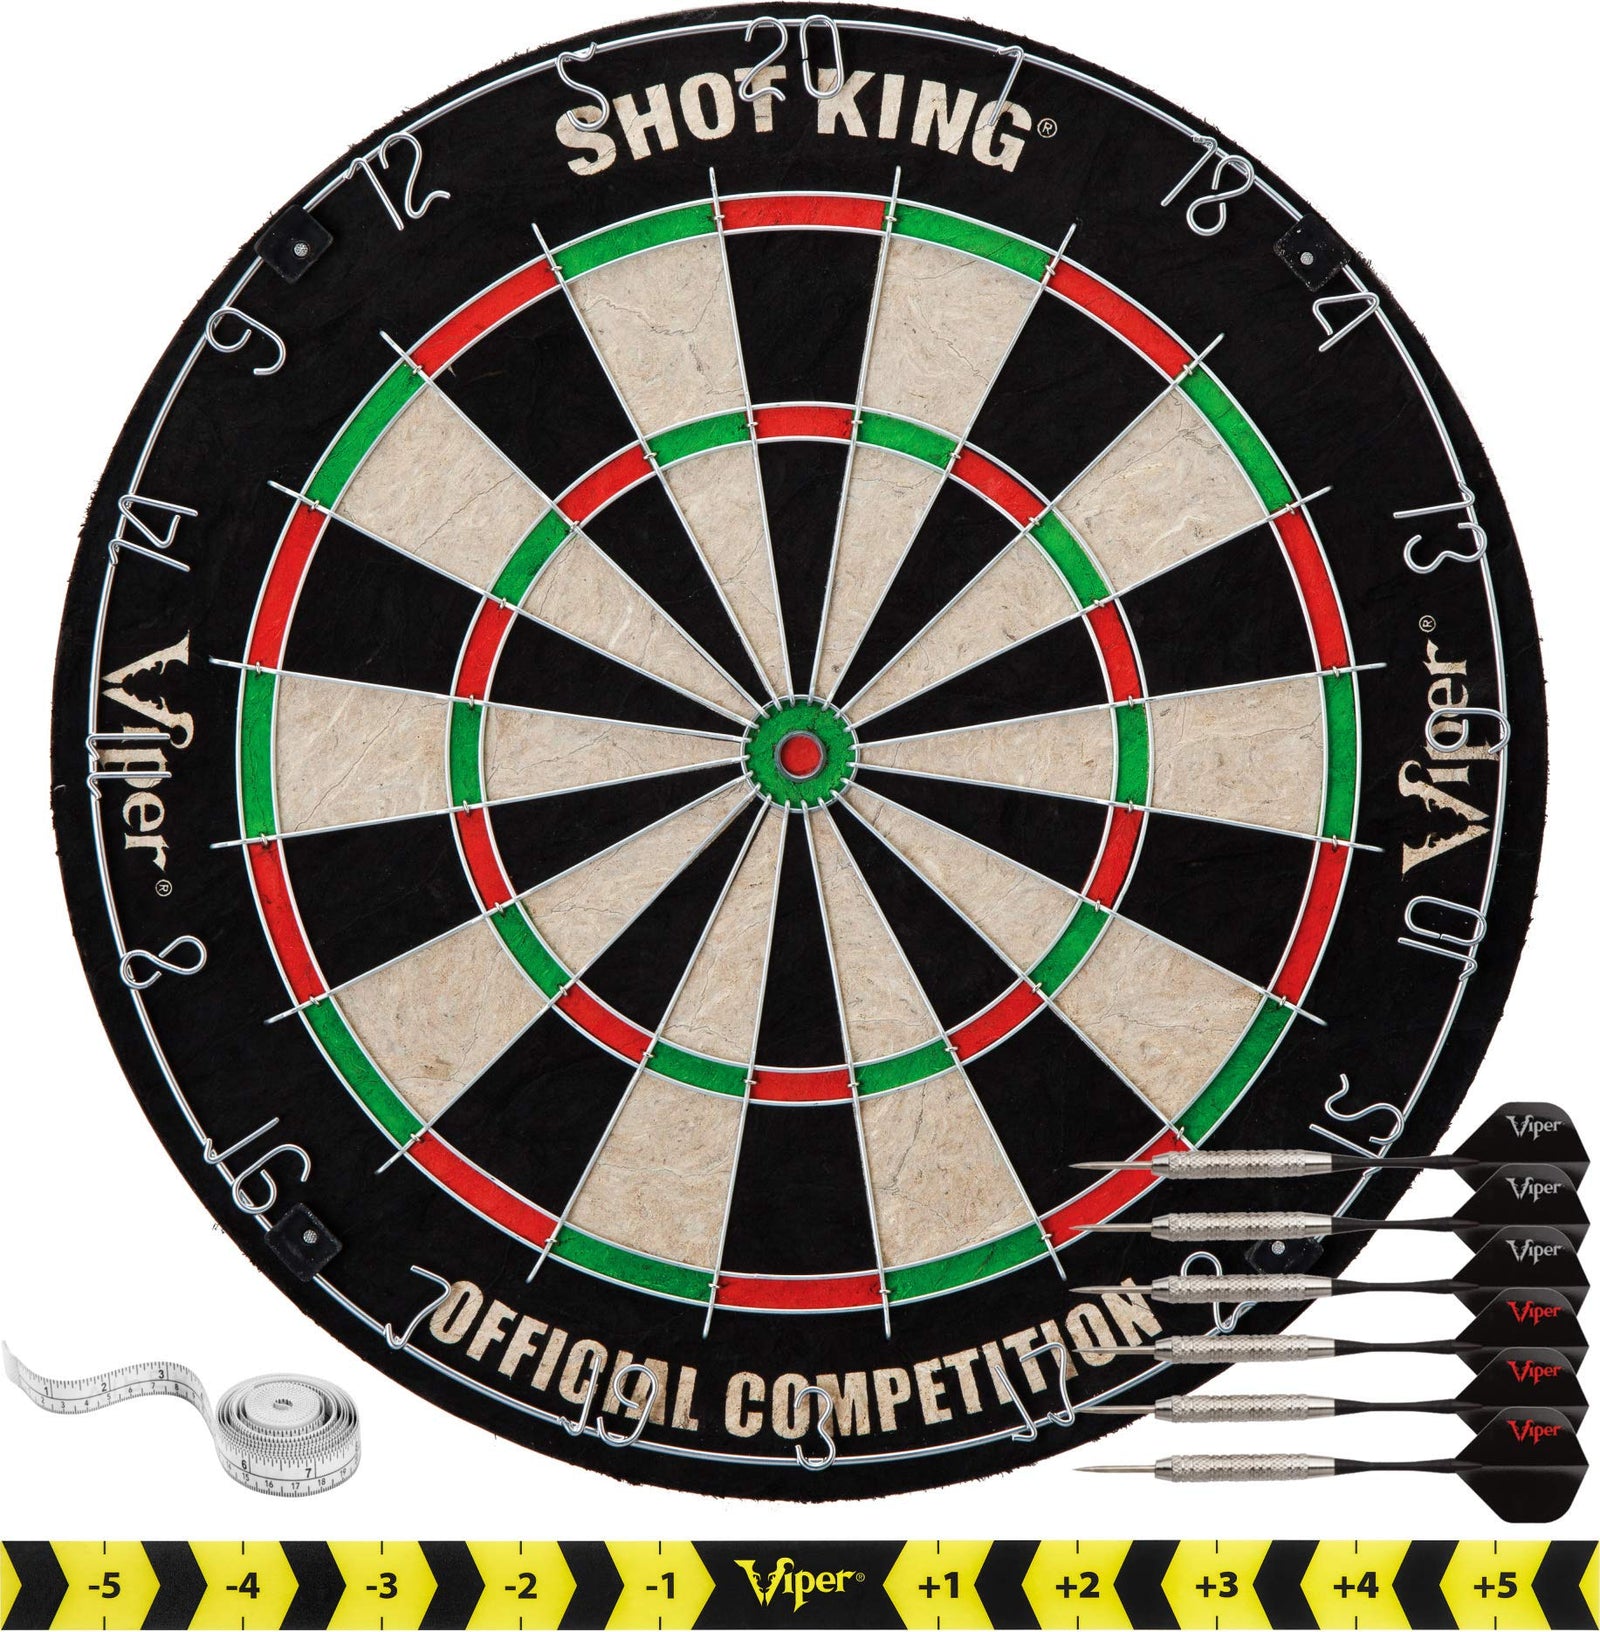 Viper by GLD Products Shot King Regulation Bristle Steel Tip Dartboard Set with Staple-Free Bullseye, Galvanized Metal Radial Spider Wire; High-Grade Compressed Sisal Board with Rotating Number Ring, Includes 6 Darts, Black, 17.75 inch